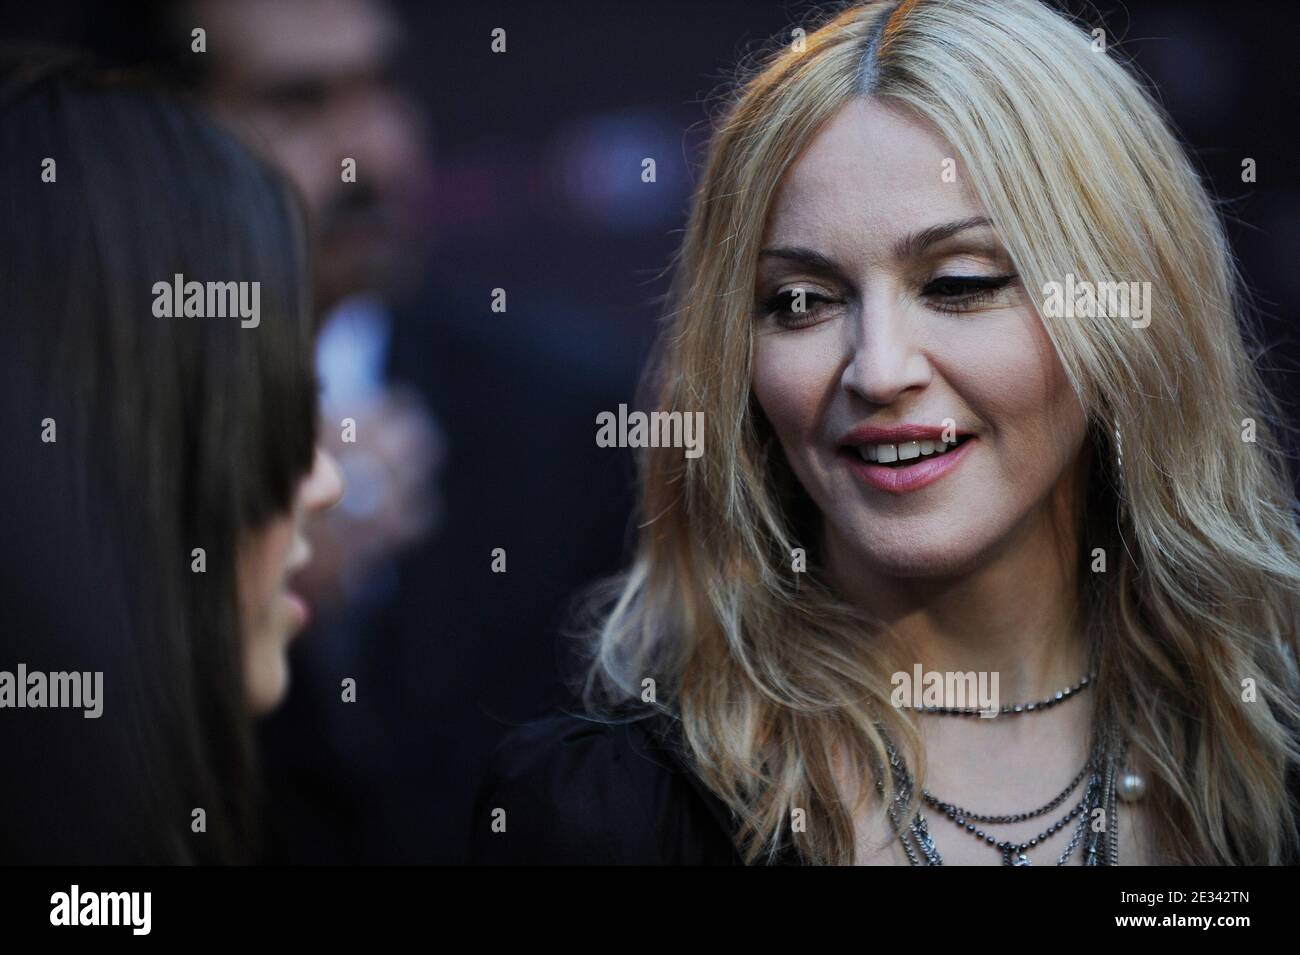 Madonna and Lourdes Leon attend the 'Material Girl' collection launch at Macy's Herald Square in New York City, NY, USA, on September 22, 2010. Photo by Mehdi Taamallah/ABACAPRESS.COM (Pictured: Madonna, Lourdes Leon) Stock Photo